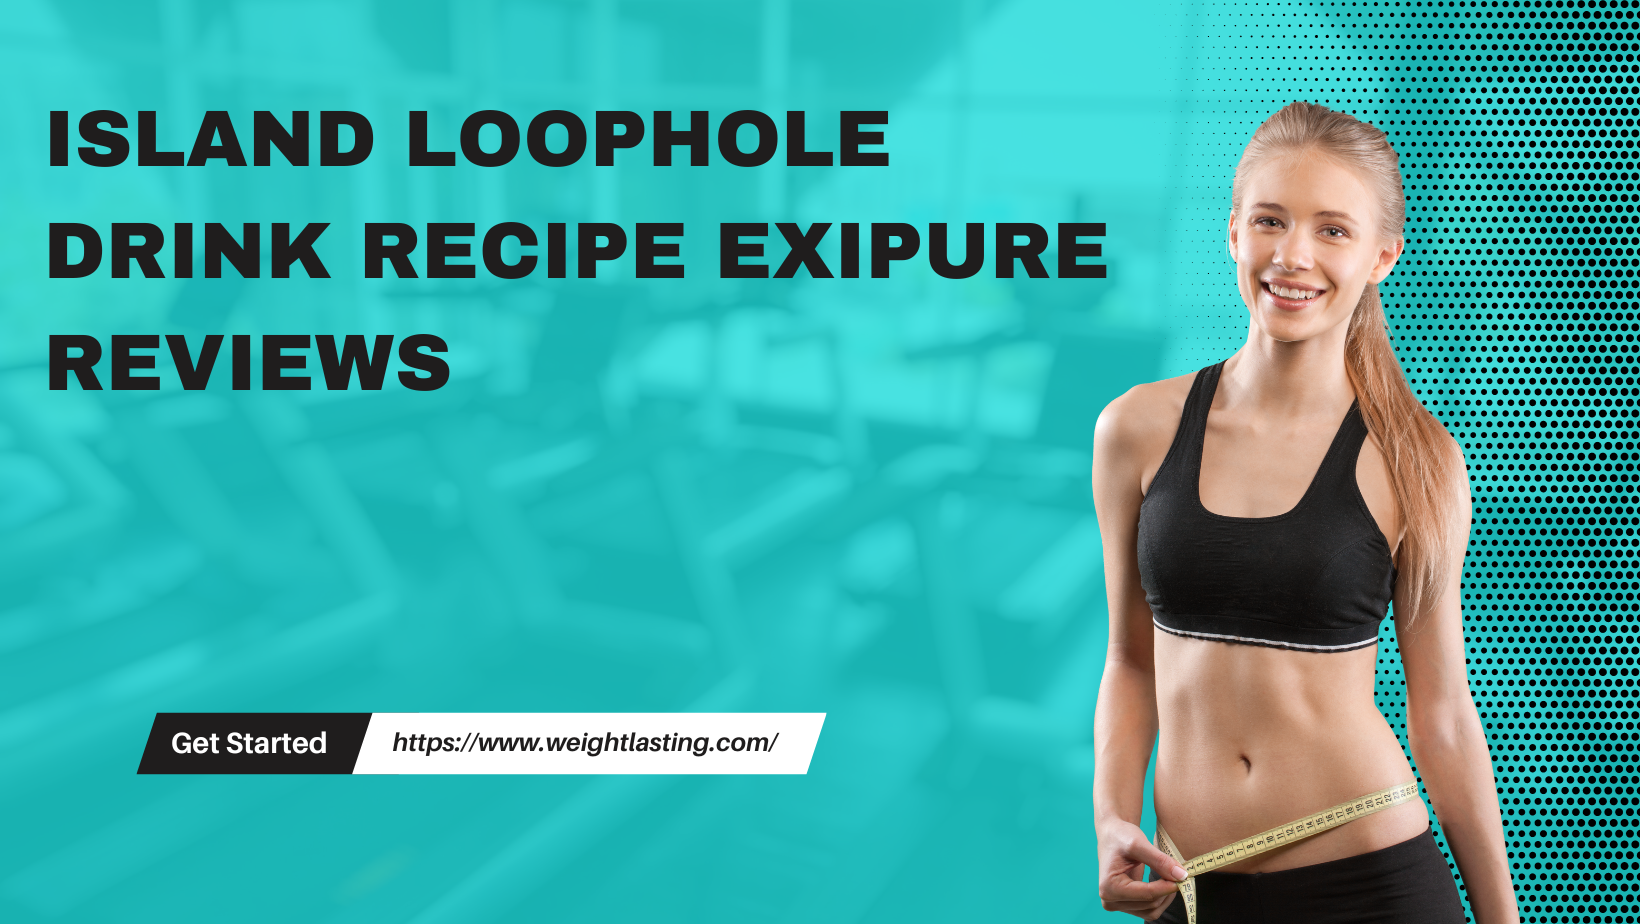 Island Loophole Drink Recipe Exipure Reviews – The Ultimate Solution for Weight Loss